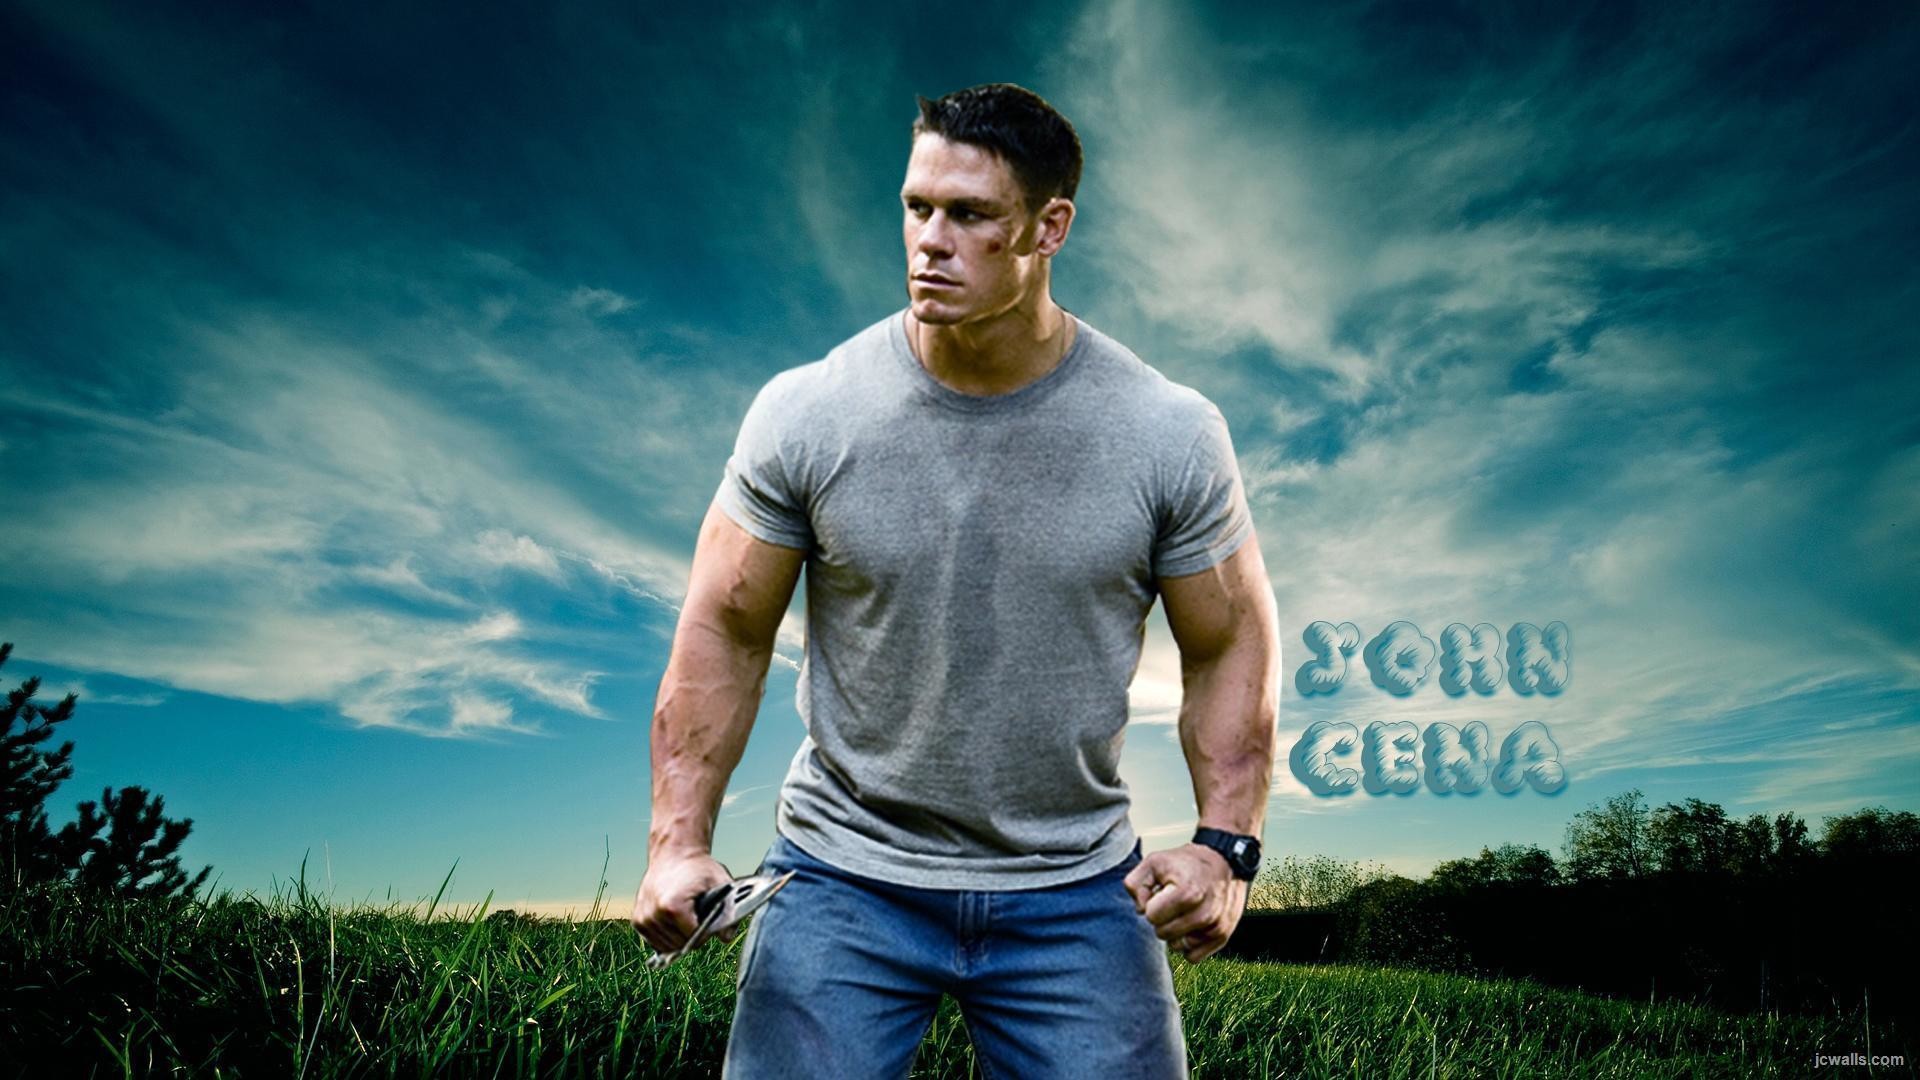 1920x1080 John Cena HD Wallpaper And Images 2015 (13) - Hd Wallpapers Free 2015